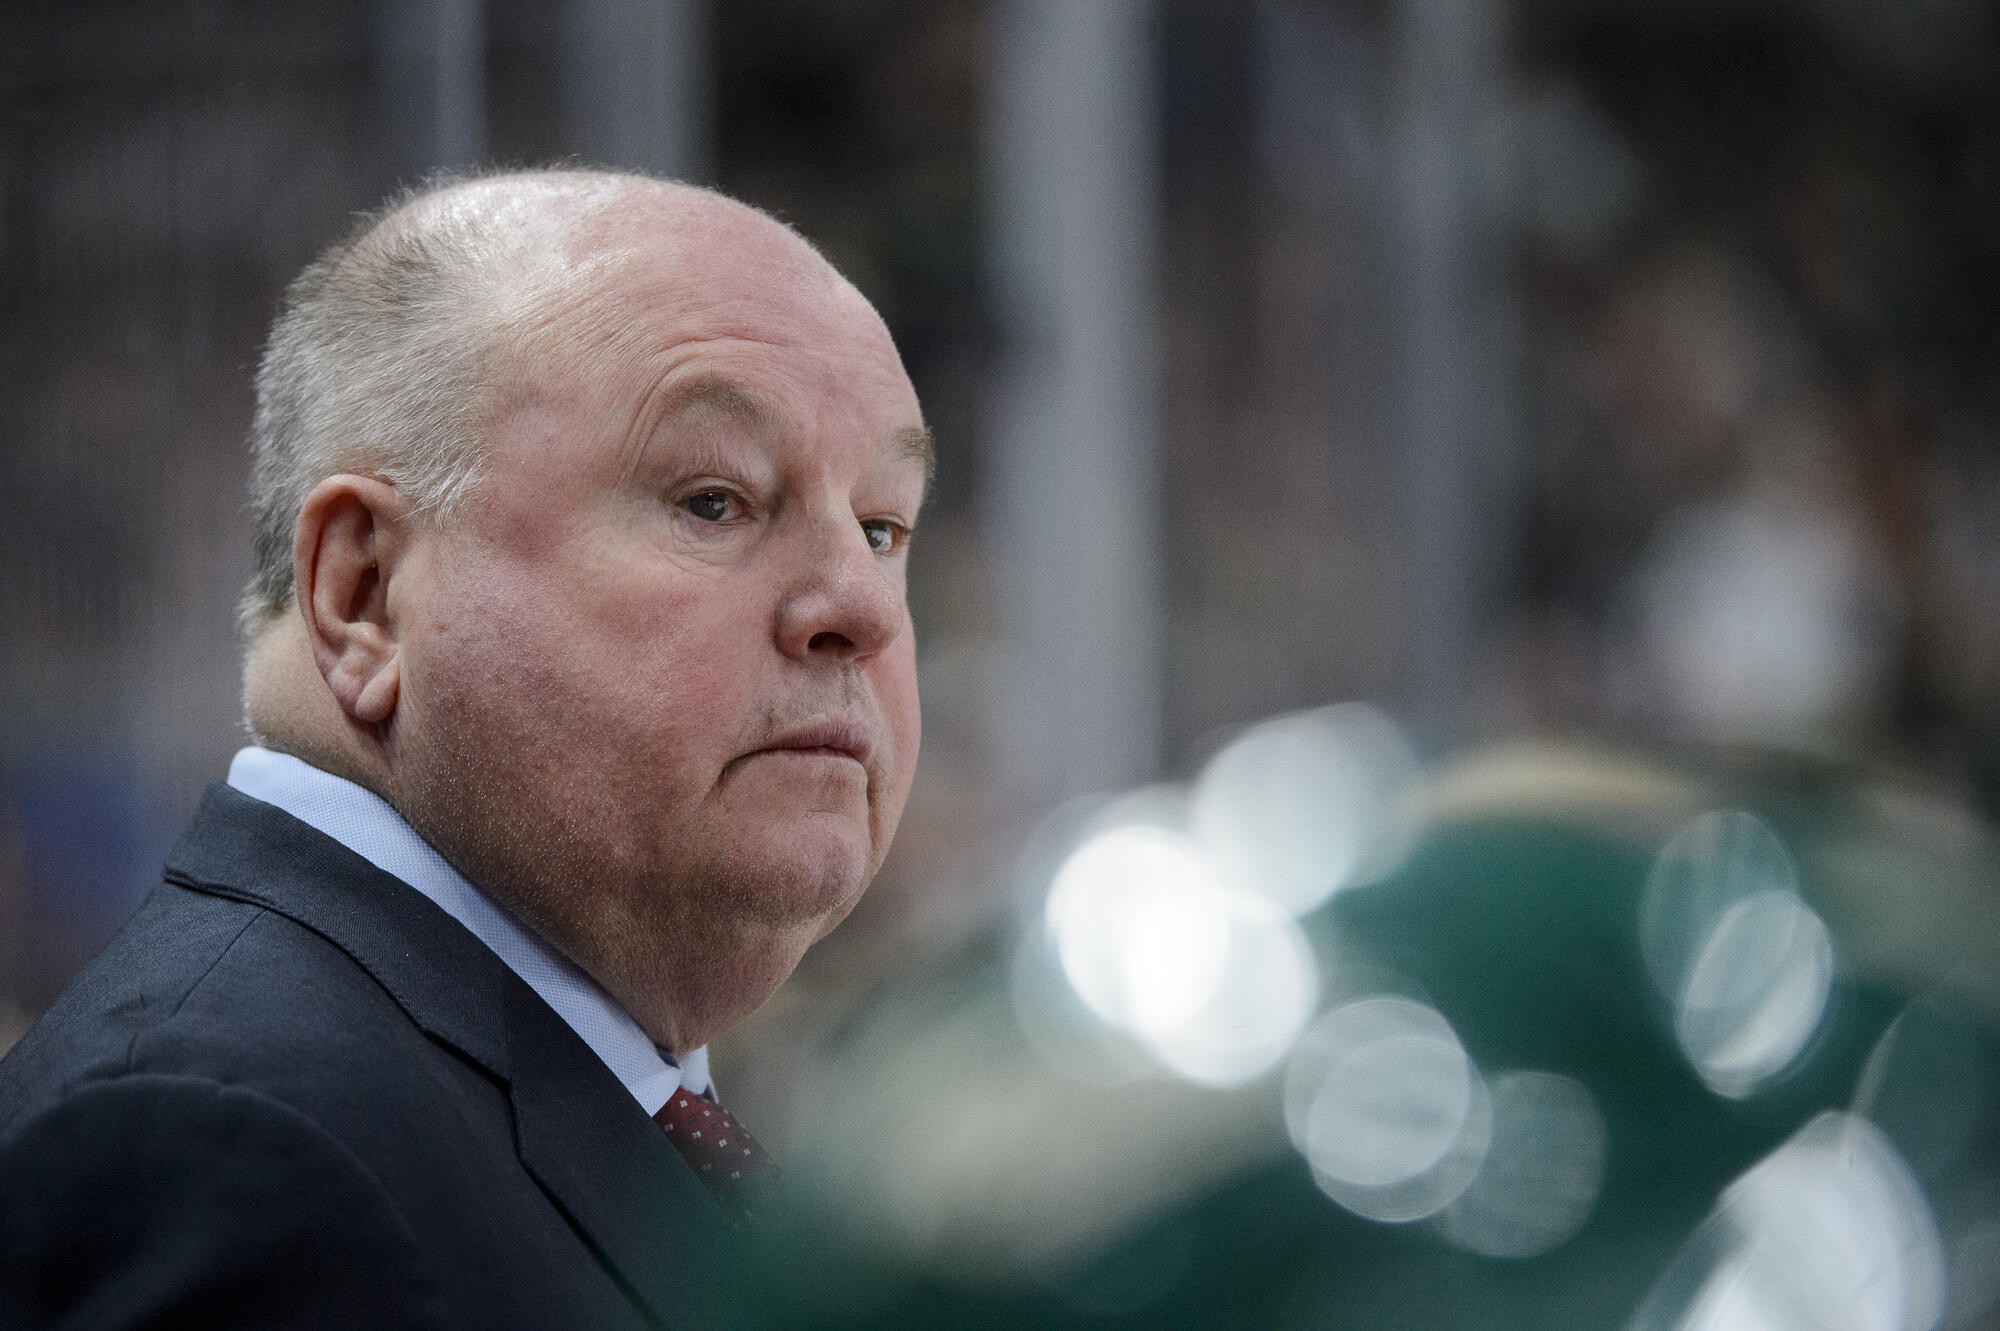 ST PAUL, MN - FEBRUARY 27: Head coach Bruce Boudreau of the Minnesota Wild looks on during the second period of the game against the Los Angeles Kings on February 27, 2017 at Xcel Energy Center in St Paul, Minnesota. The Wild defeated the Kings 5-4 in ove